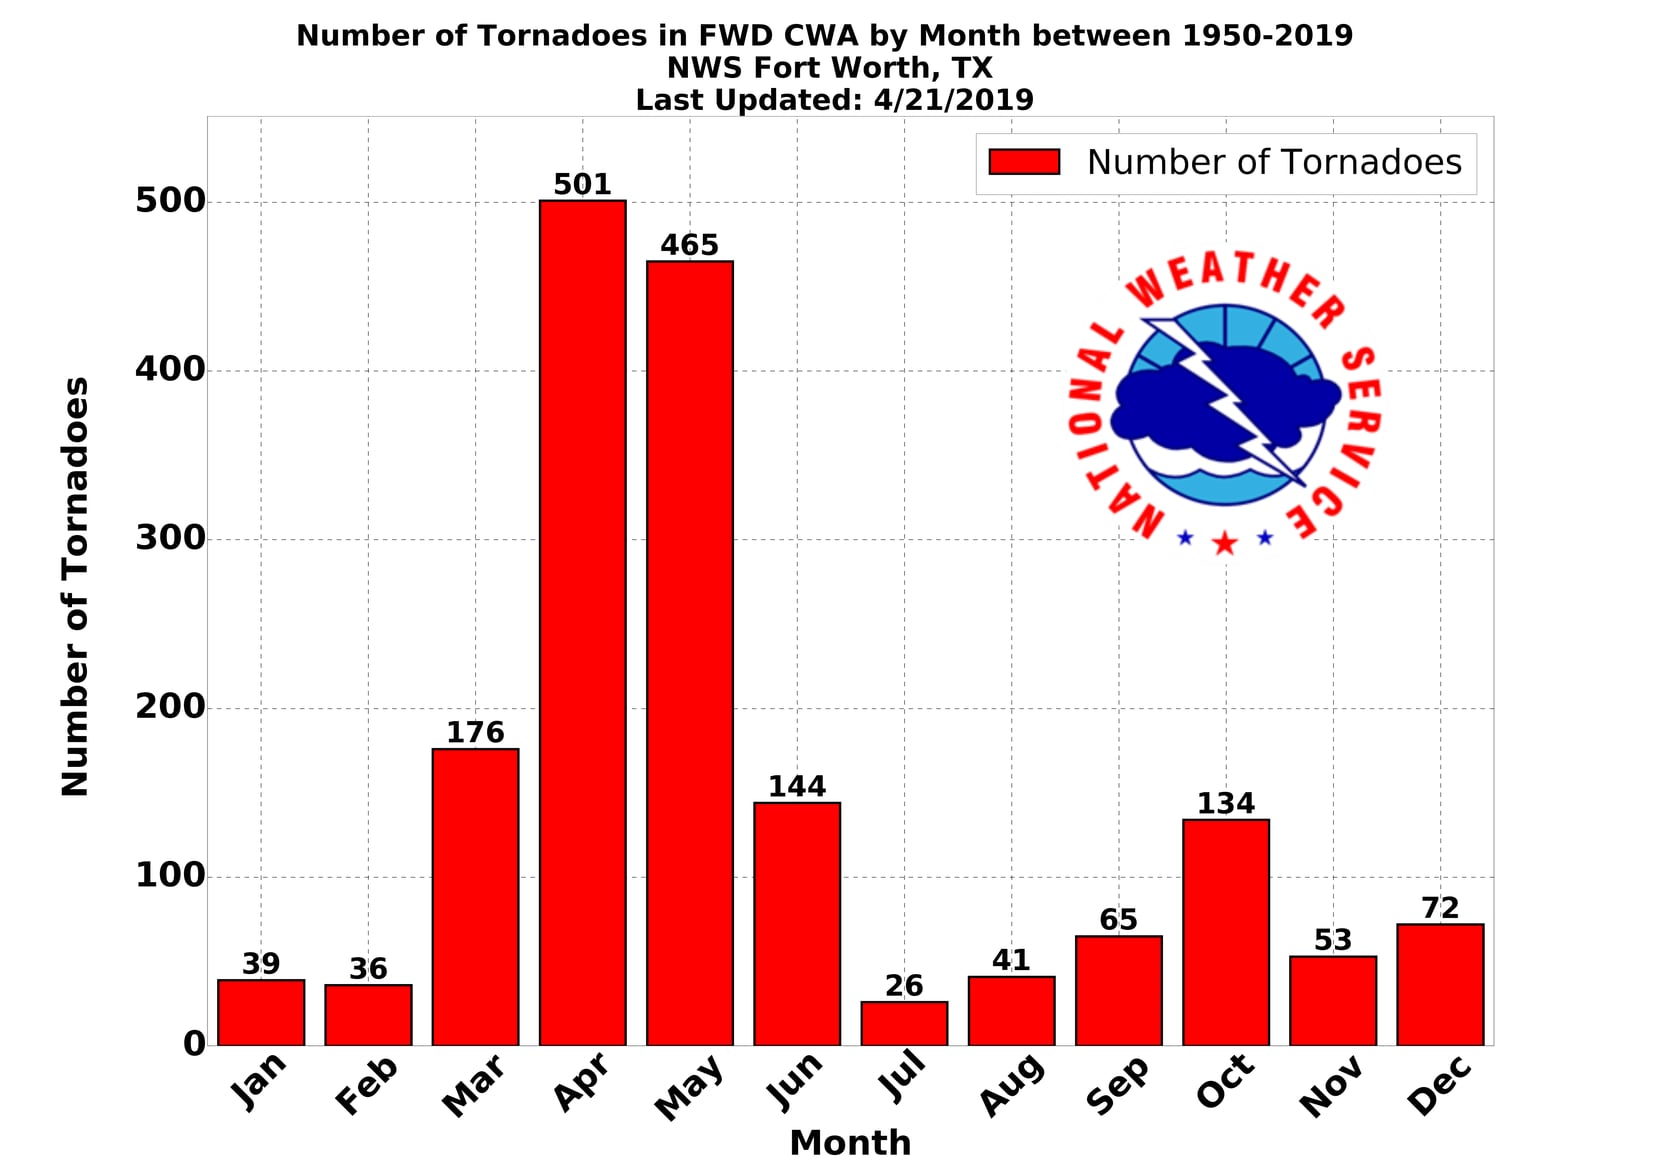 This chart shows the number of tornadoes in North Texas since 1950.